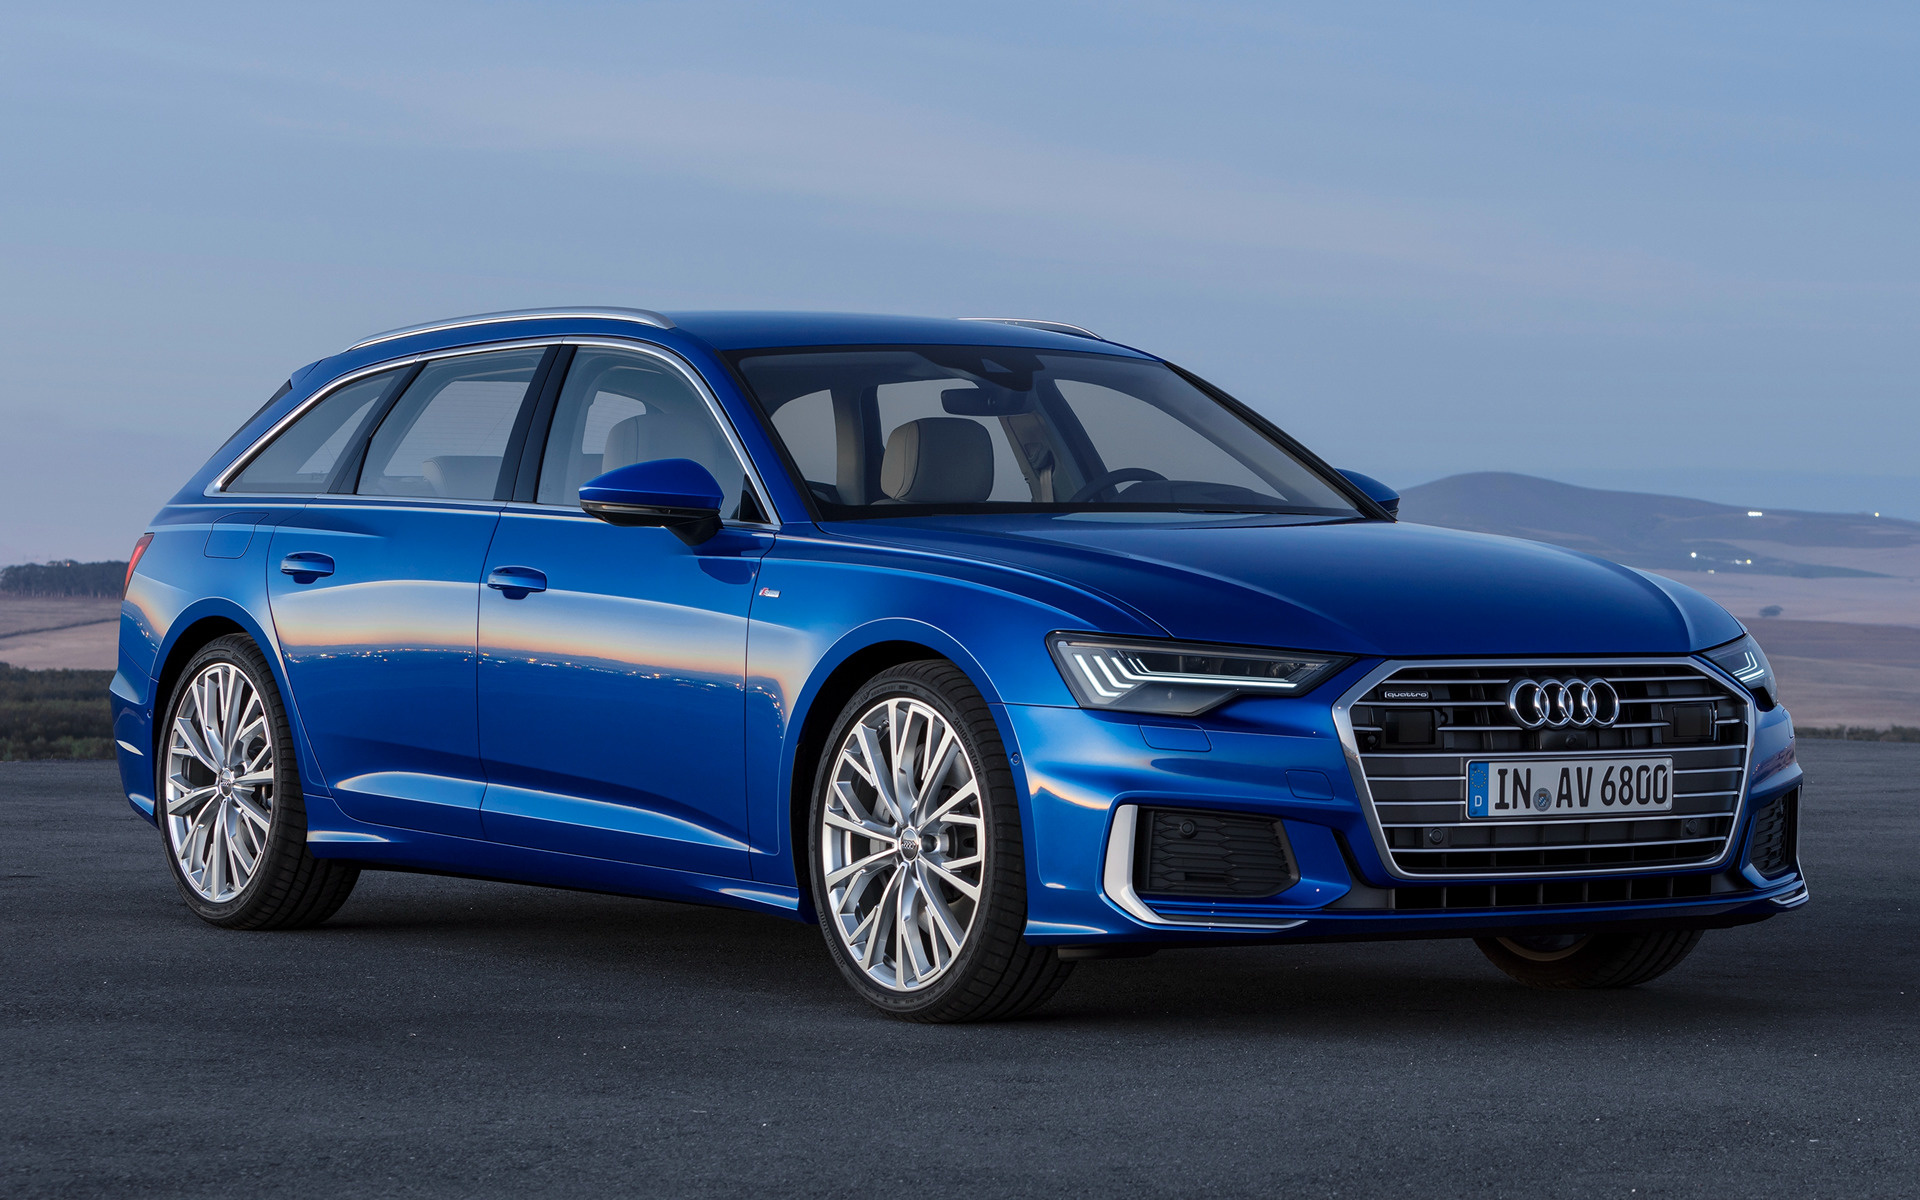 2018 Audi A6 Avant S line - Wallpapers and HD Images | Car Pixel